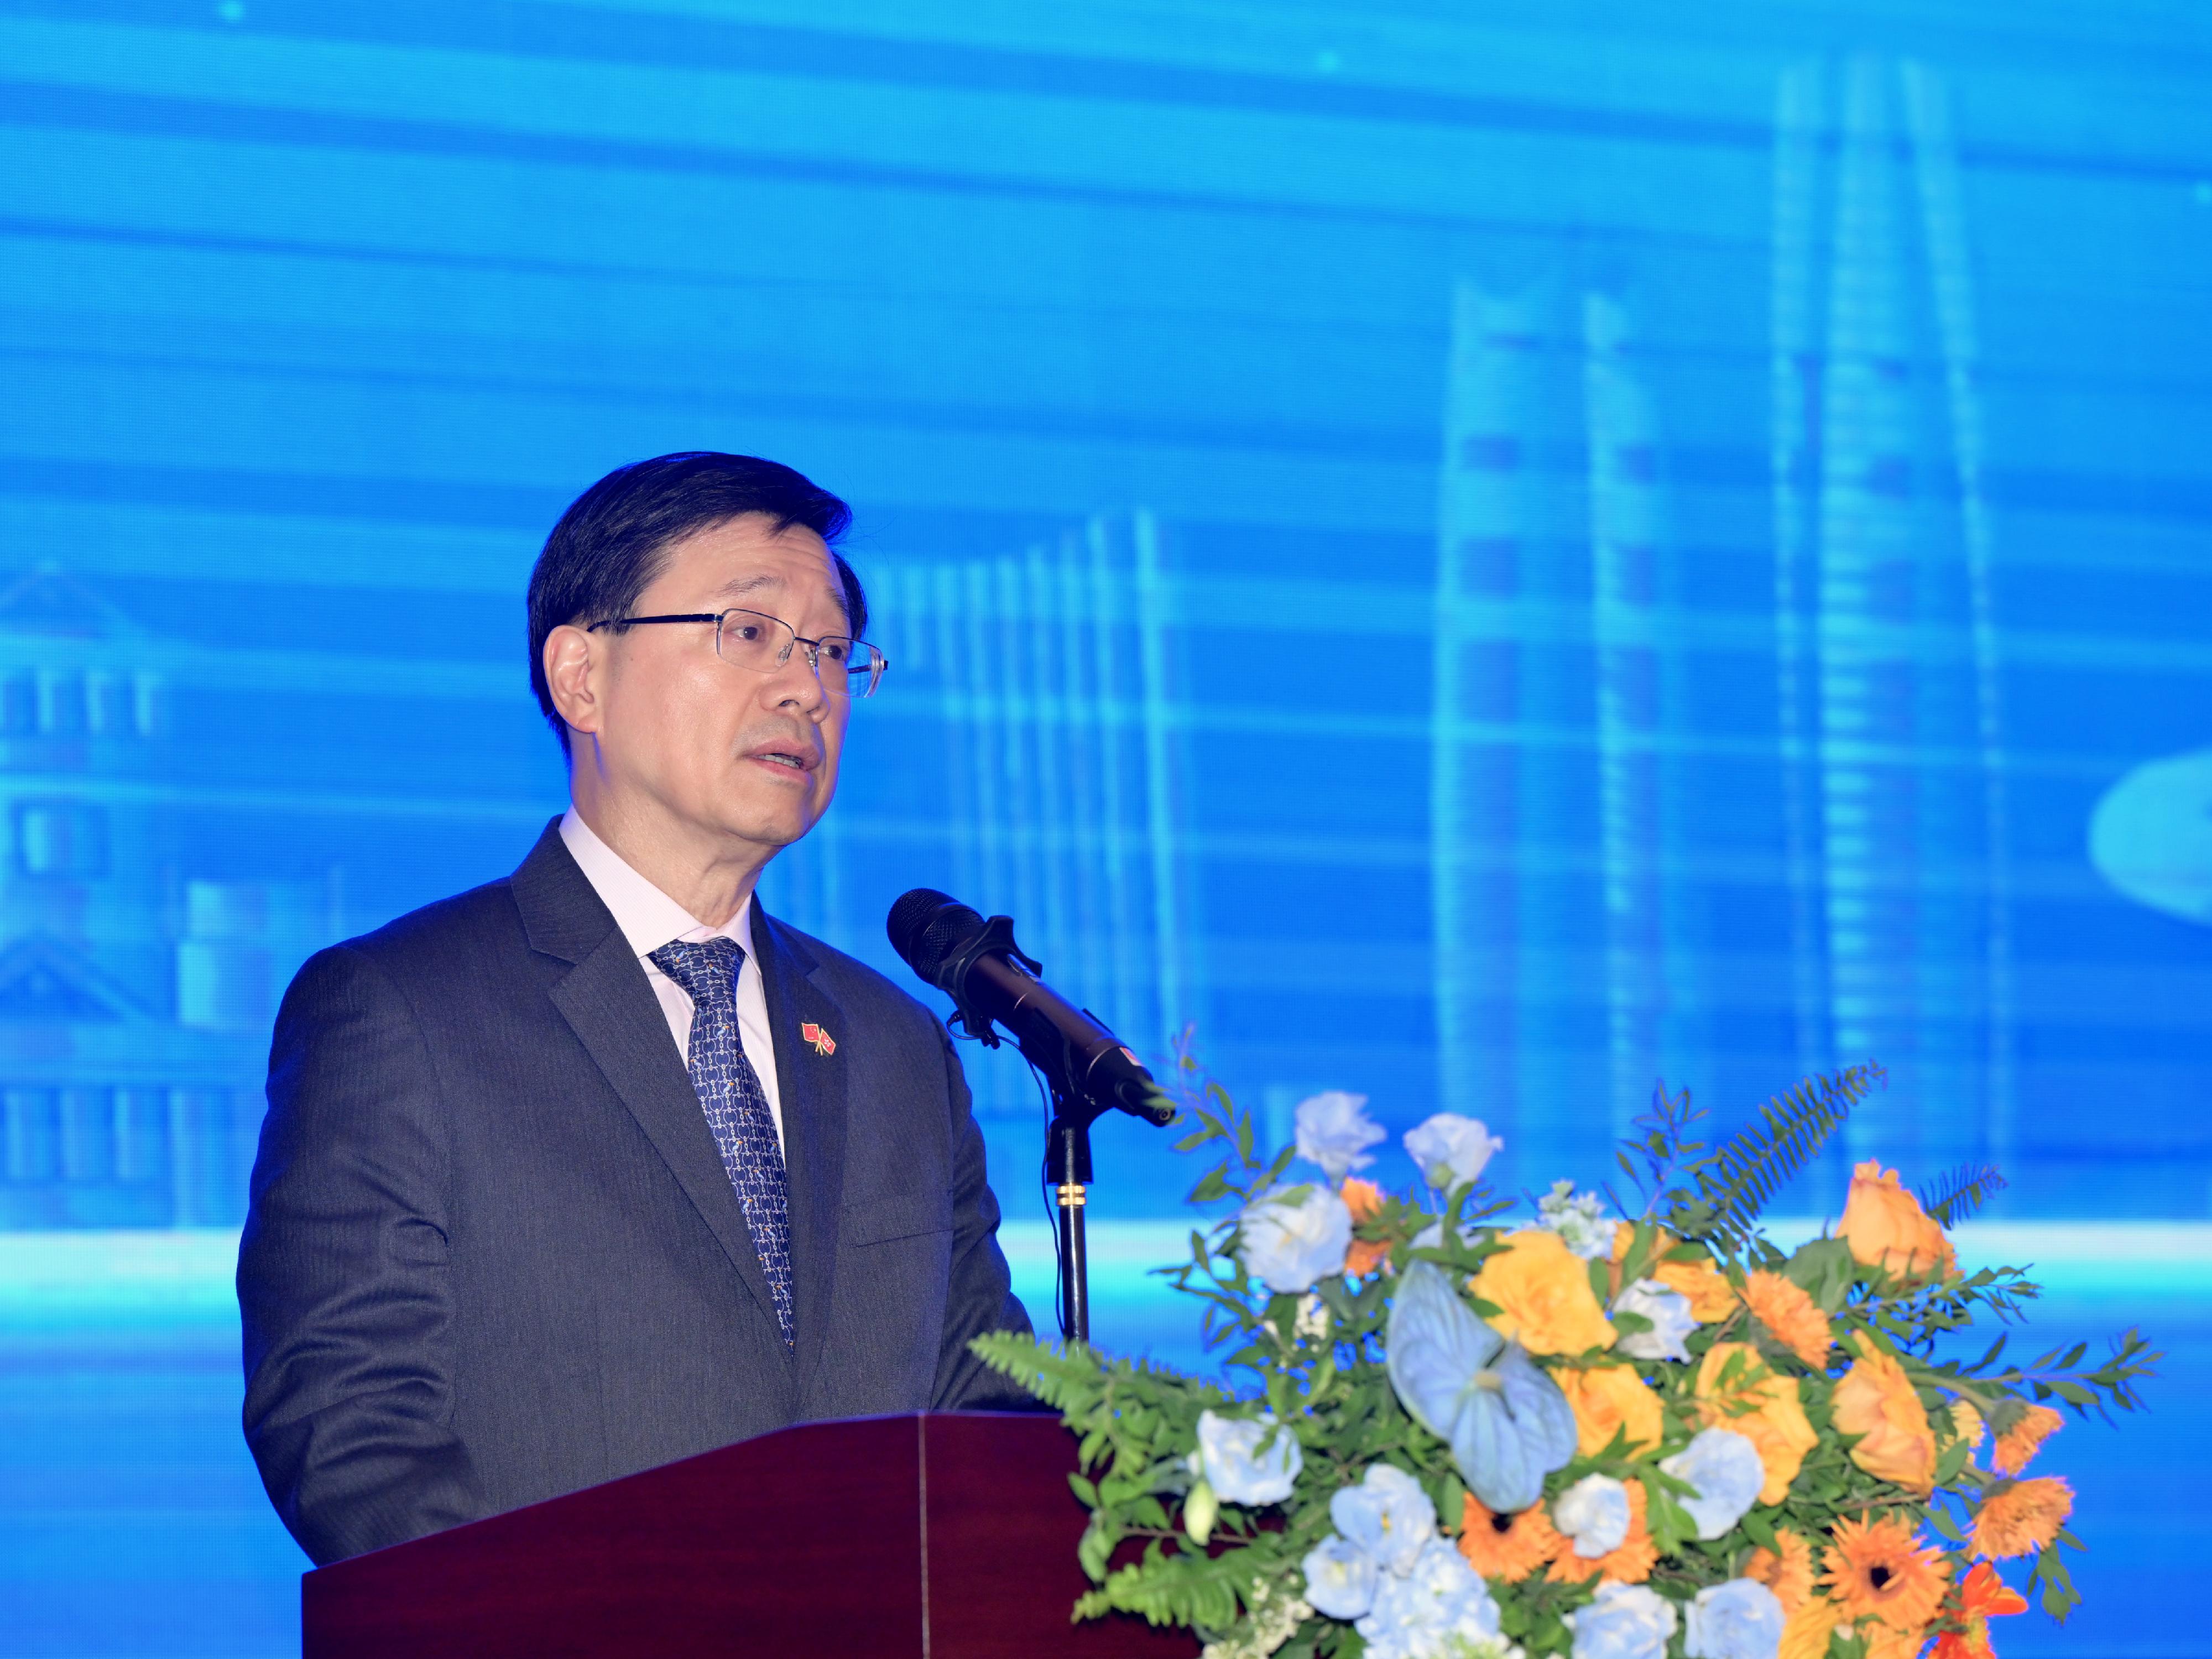 The Chief Executive, Mr John Lee, led a delegation of the Hong Kong Special Administrative Region Government and the Legislative Council to visit Guangdong-Hong Kong-Macao Greater Bay Area in Shenzhen today (April 22). Photo shows Mr Lee speaking at the dinner with leaders of Dongguan Municipal Government.